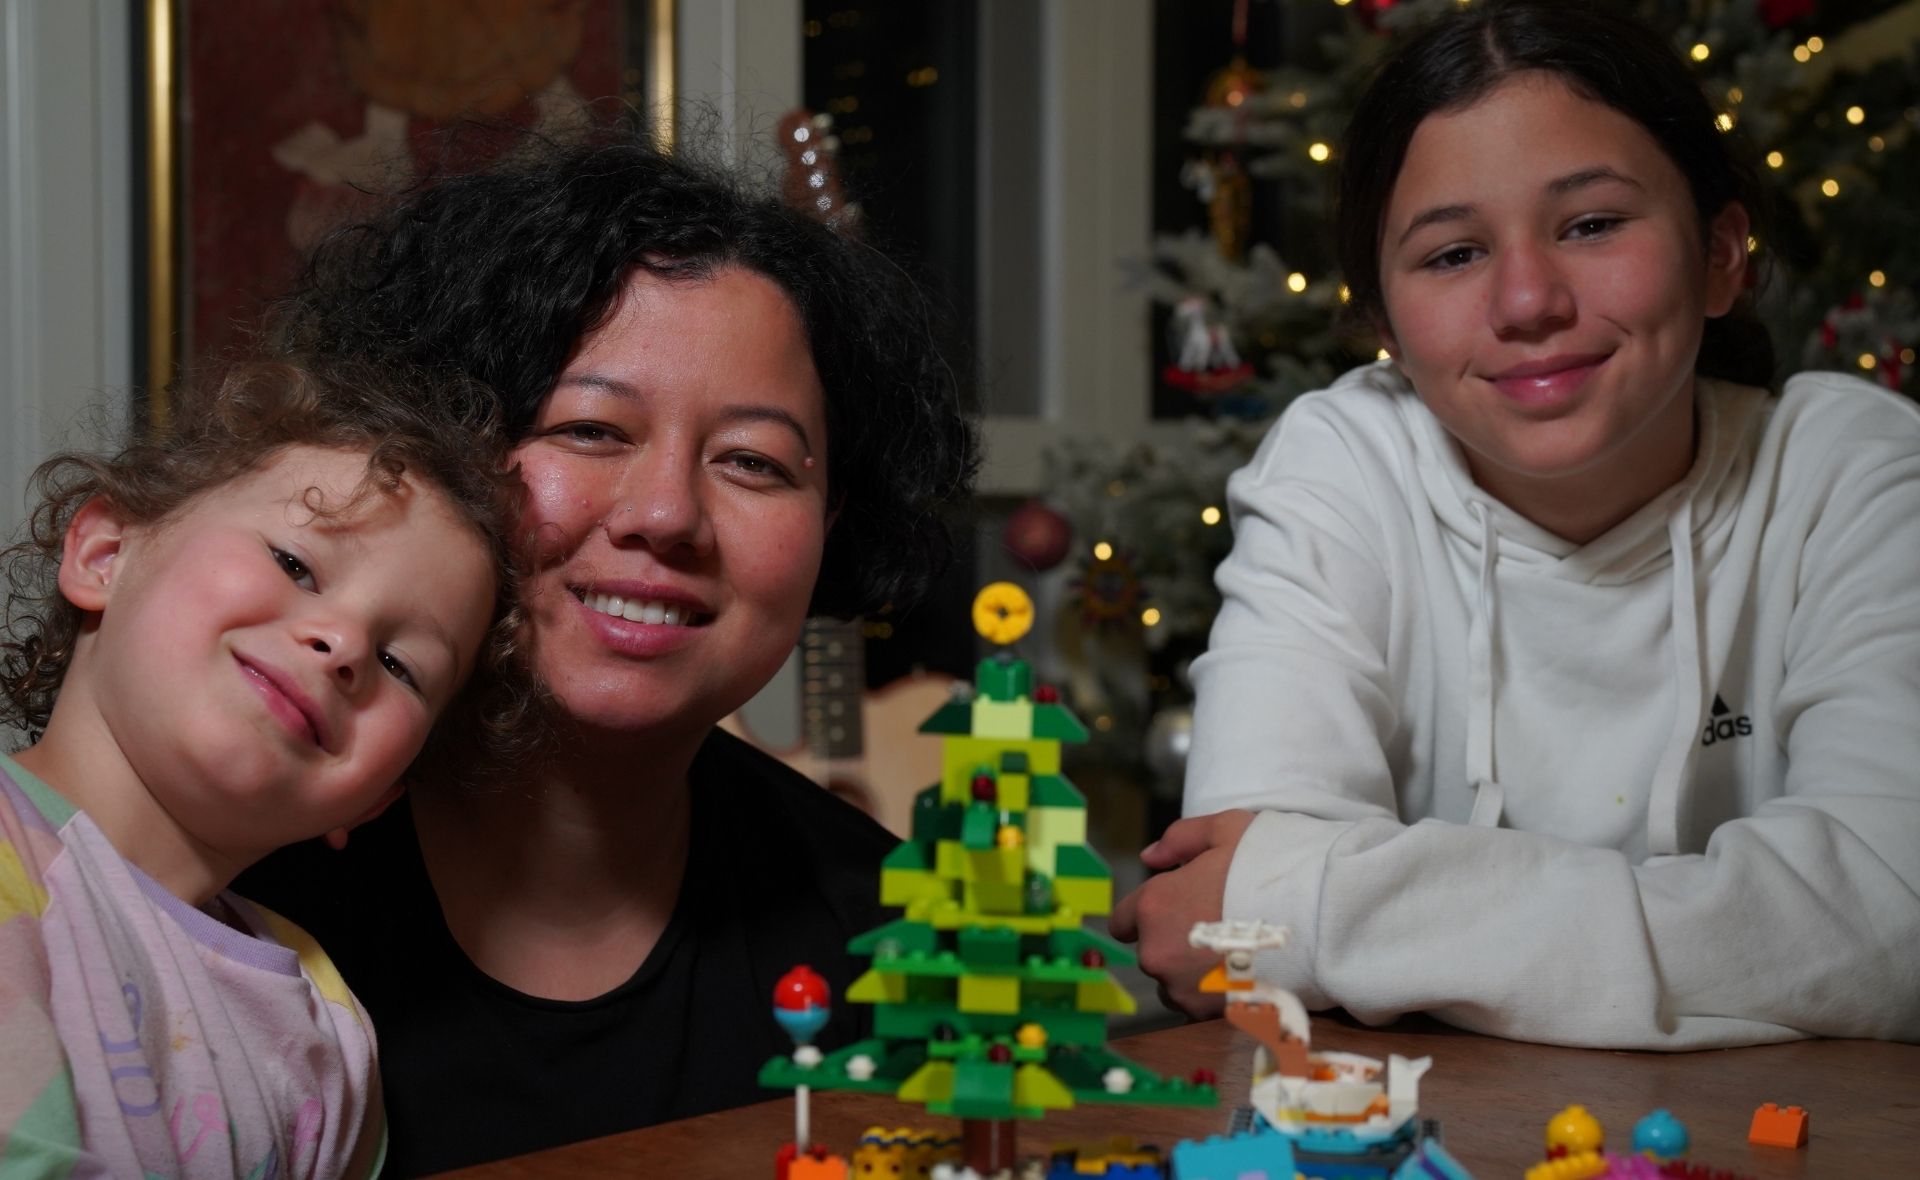 EXCLUSIVE: Mahalia Barnes shares a glimpse inside the Barnes family Christmas, and you can bet there’s a carol or two